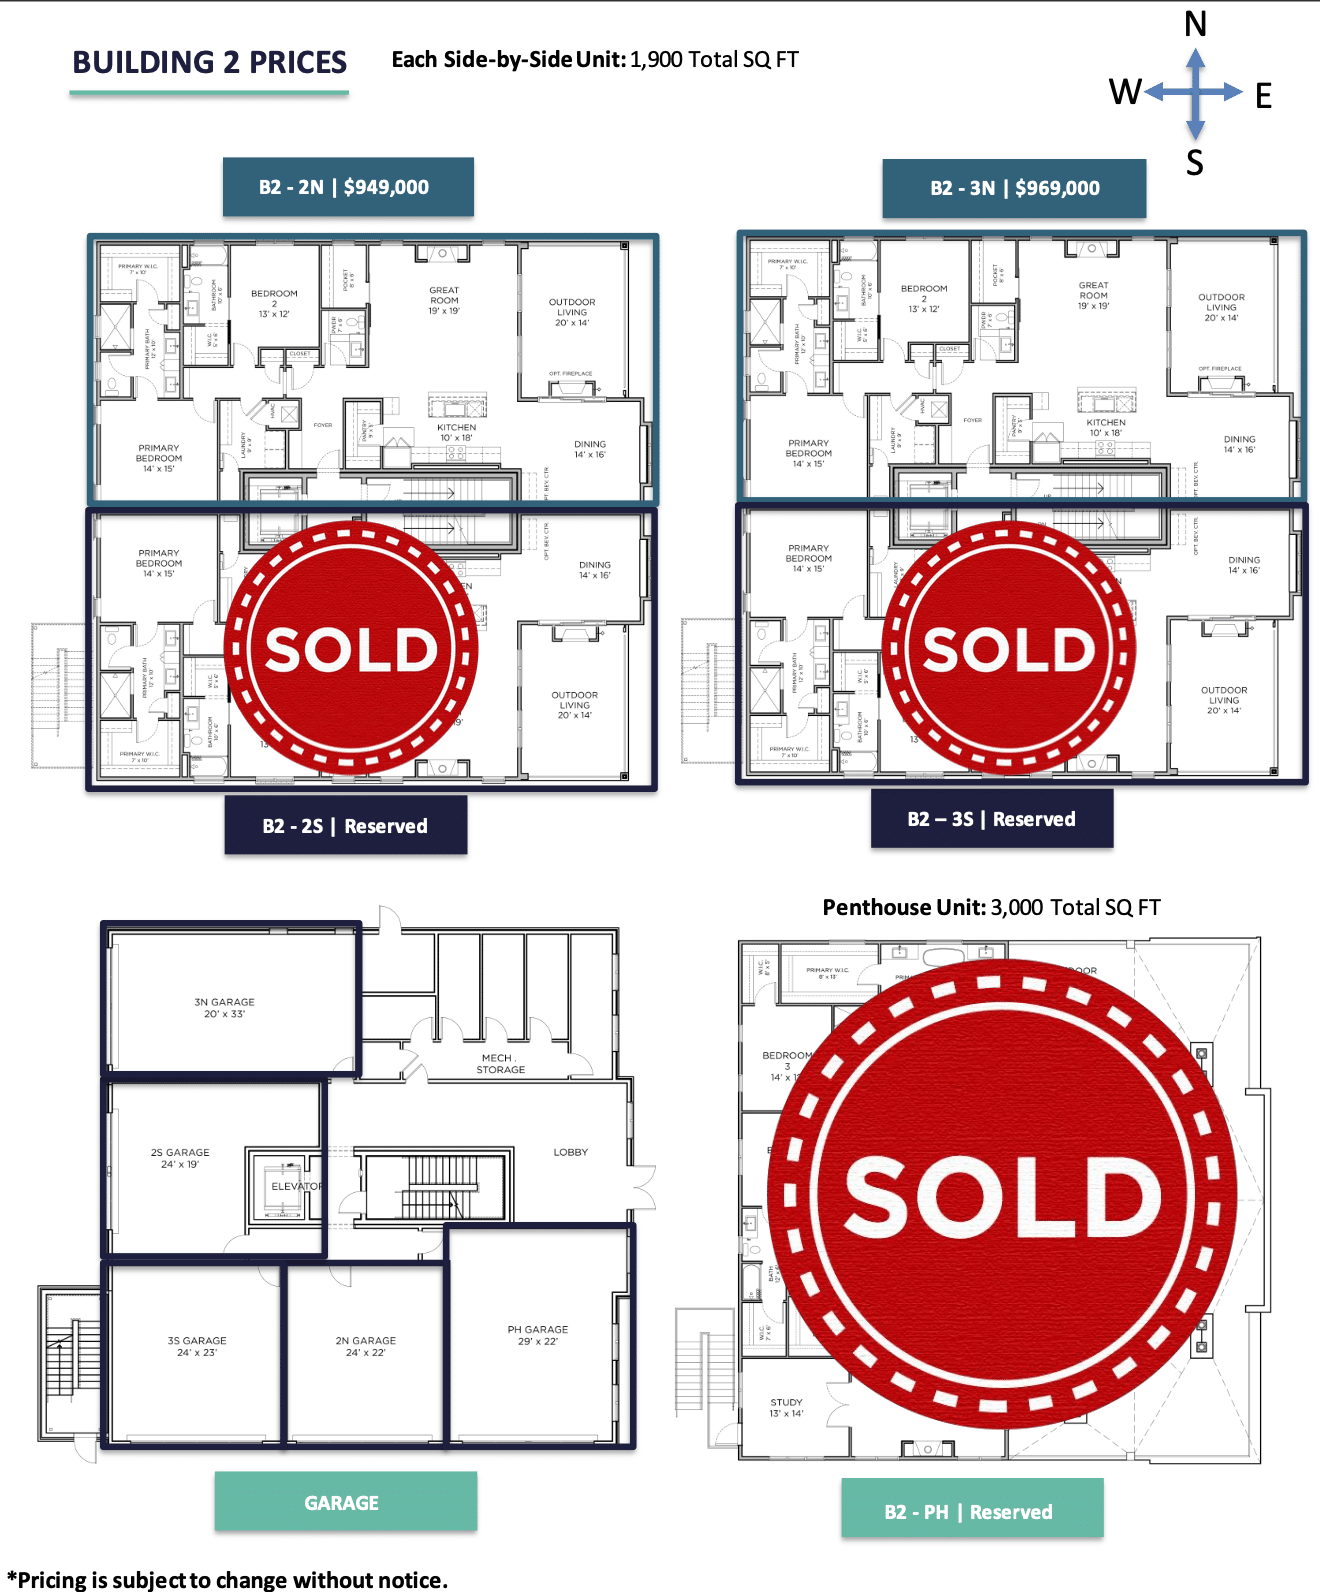 A floor plan for a custom home in Carmel, Indiana with a sold sign.